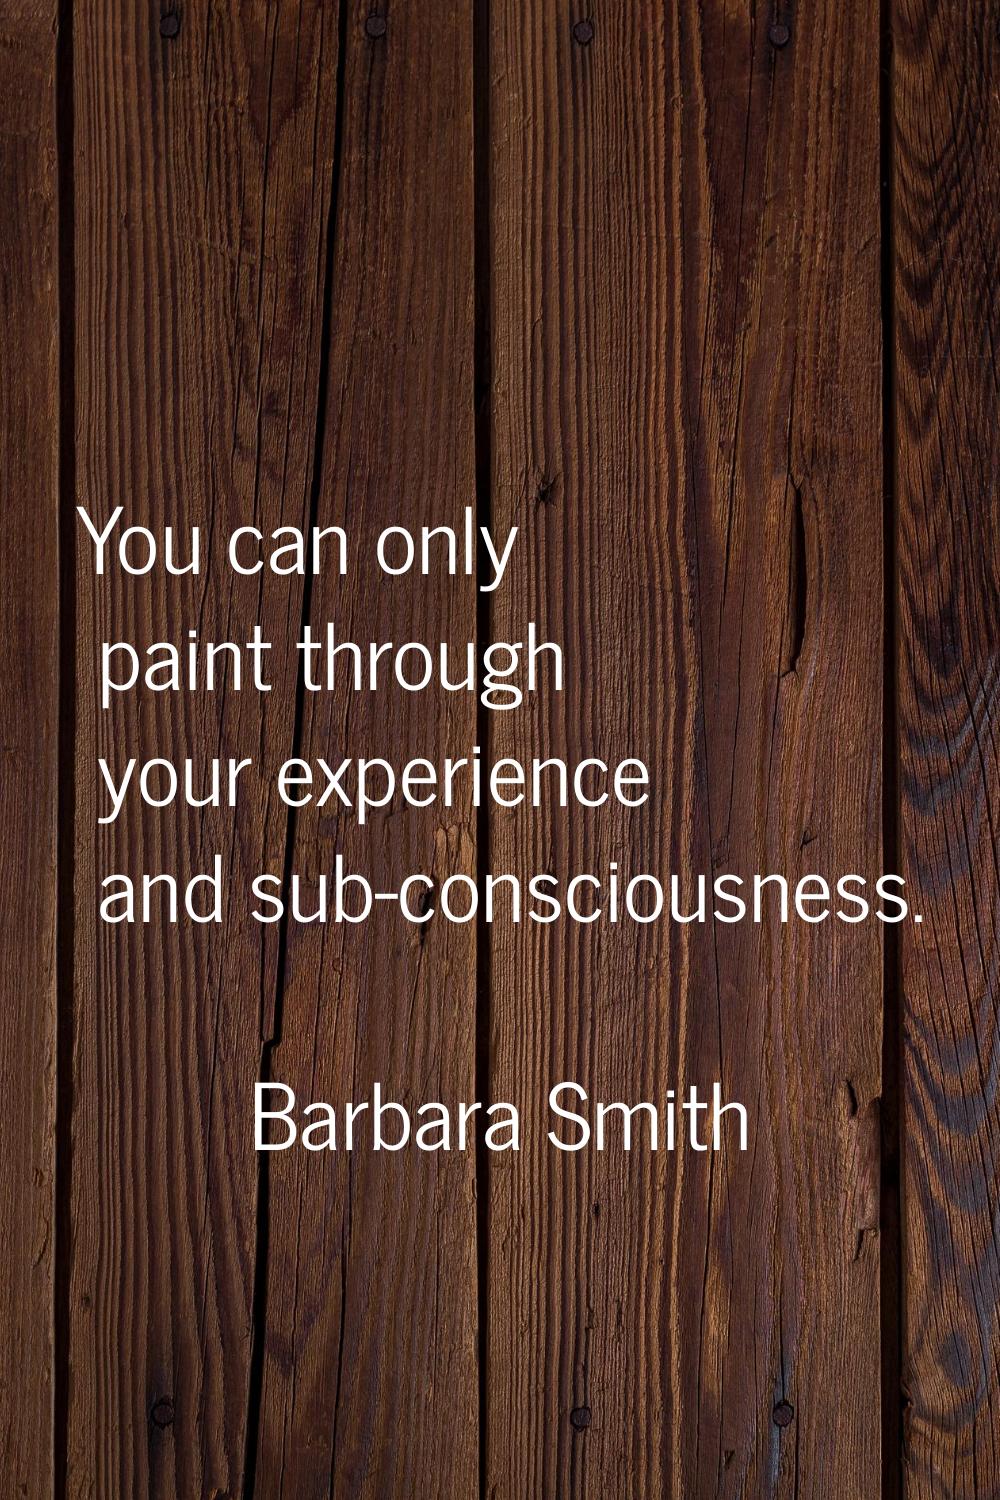 You can only paint through your experience and sub-consciousness.